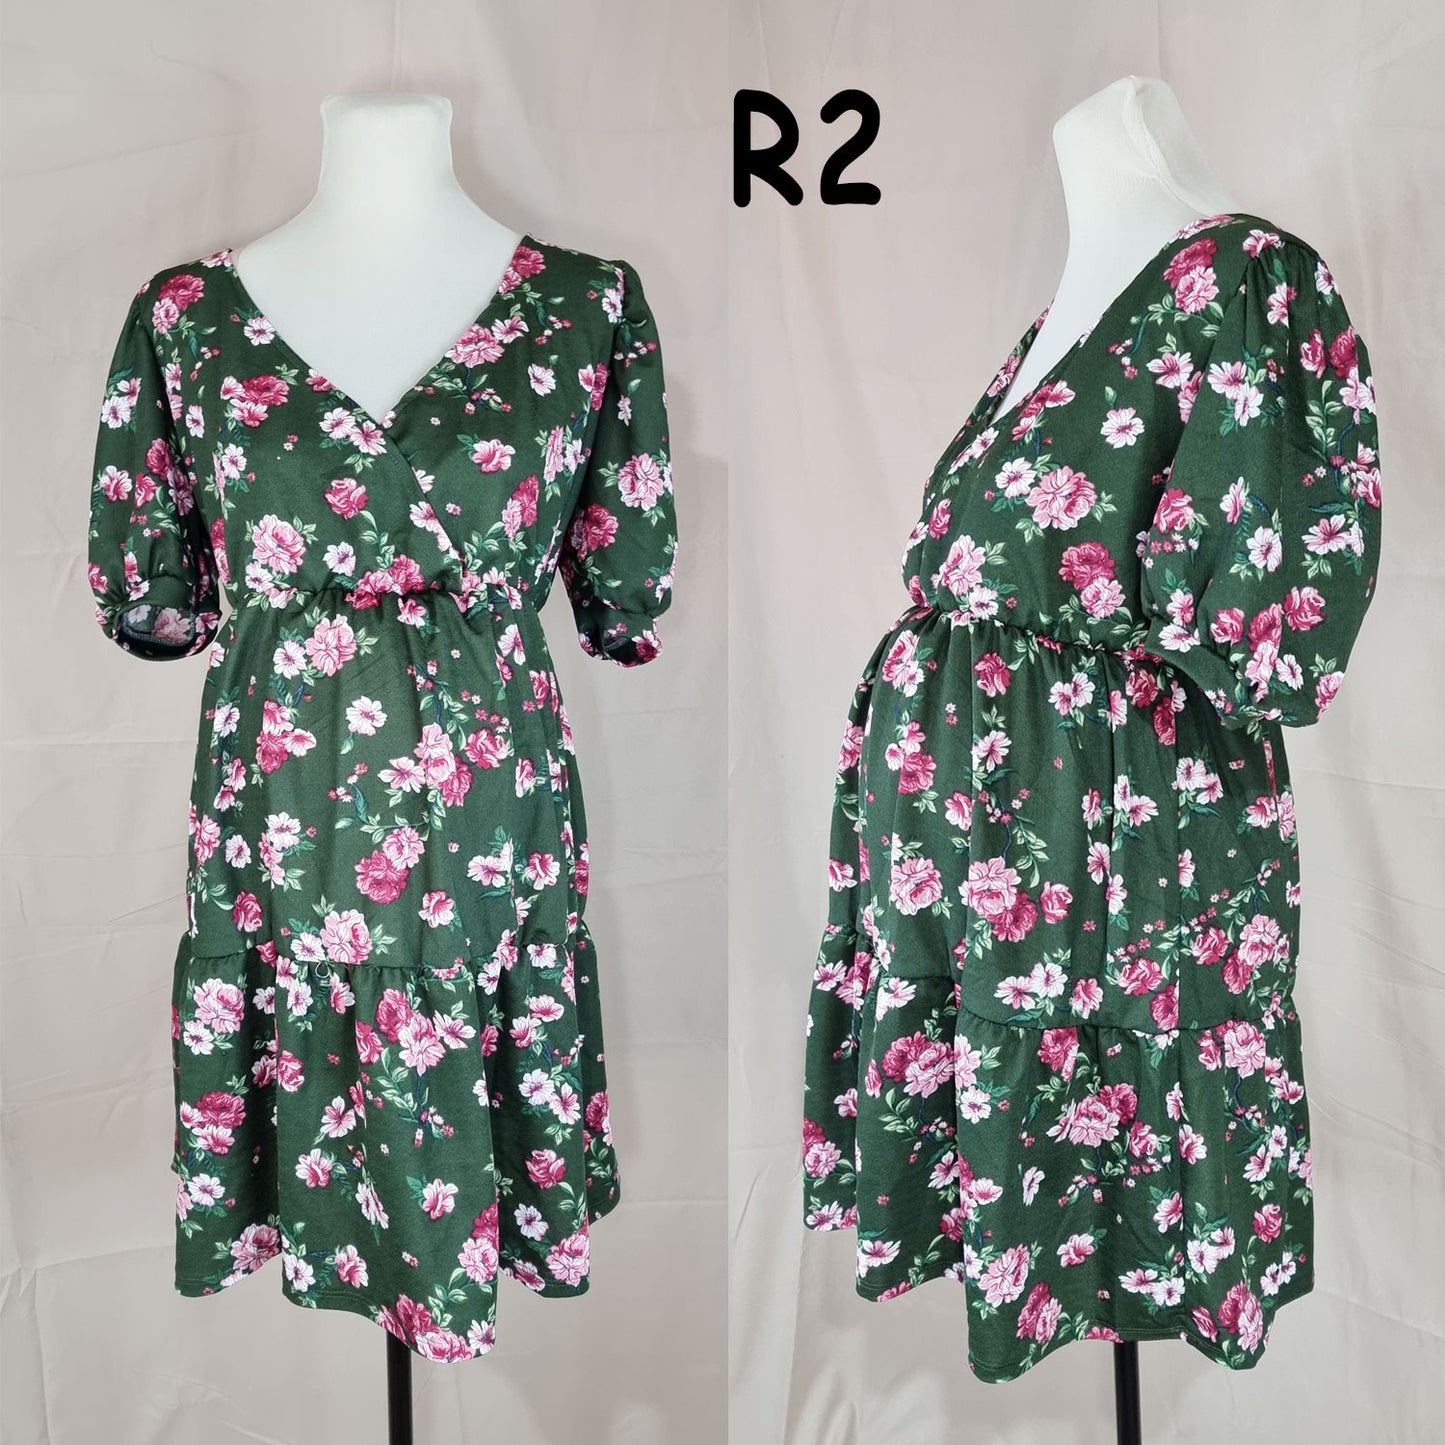 Roxie Dolly Dress - For Ladies, Pregnant Women and Mommies